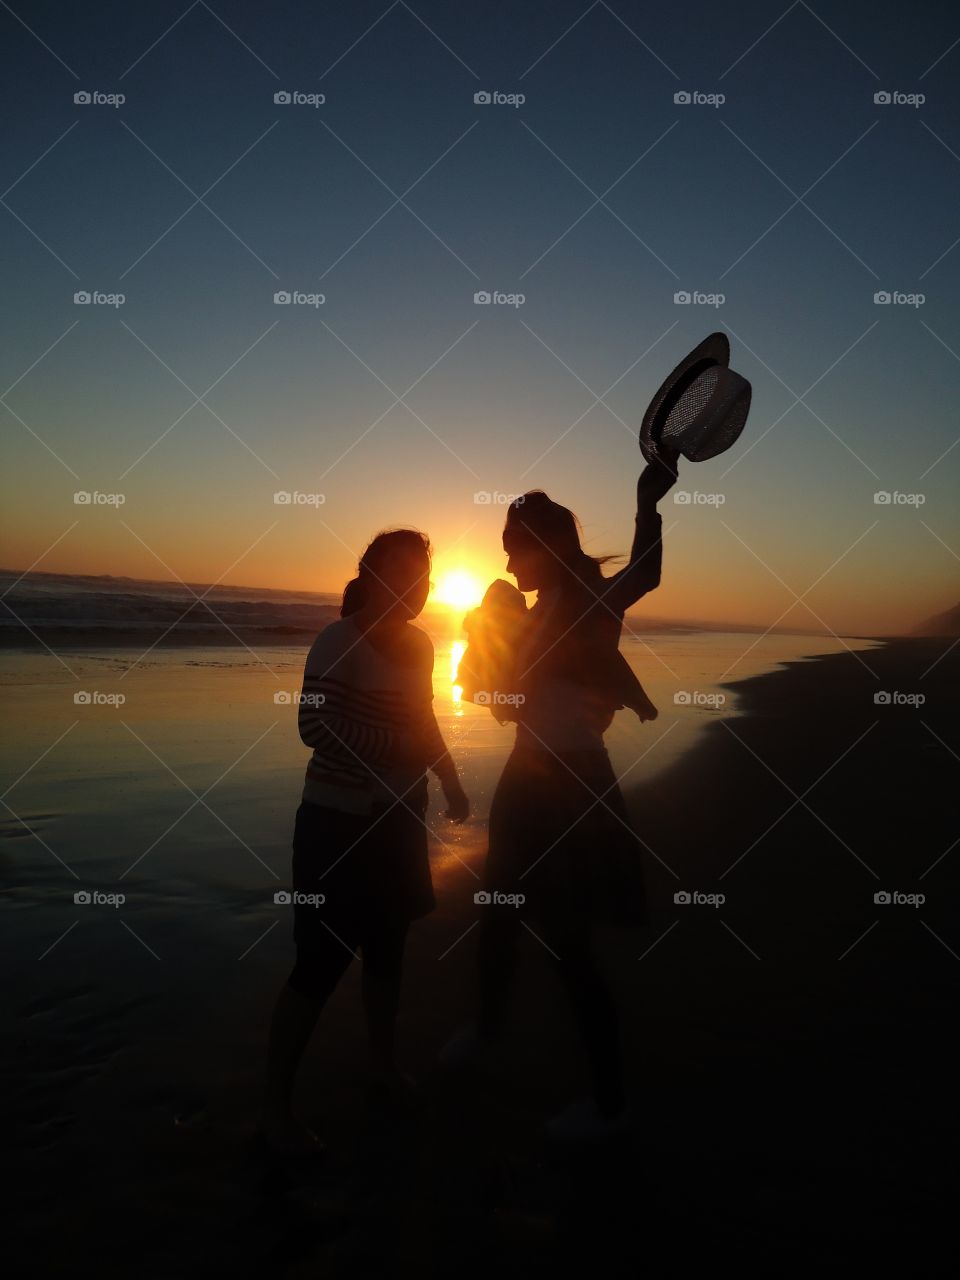 Silhouette at the beach of two young girls